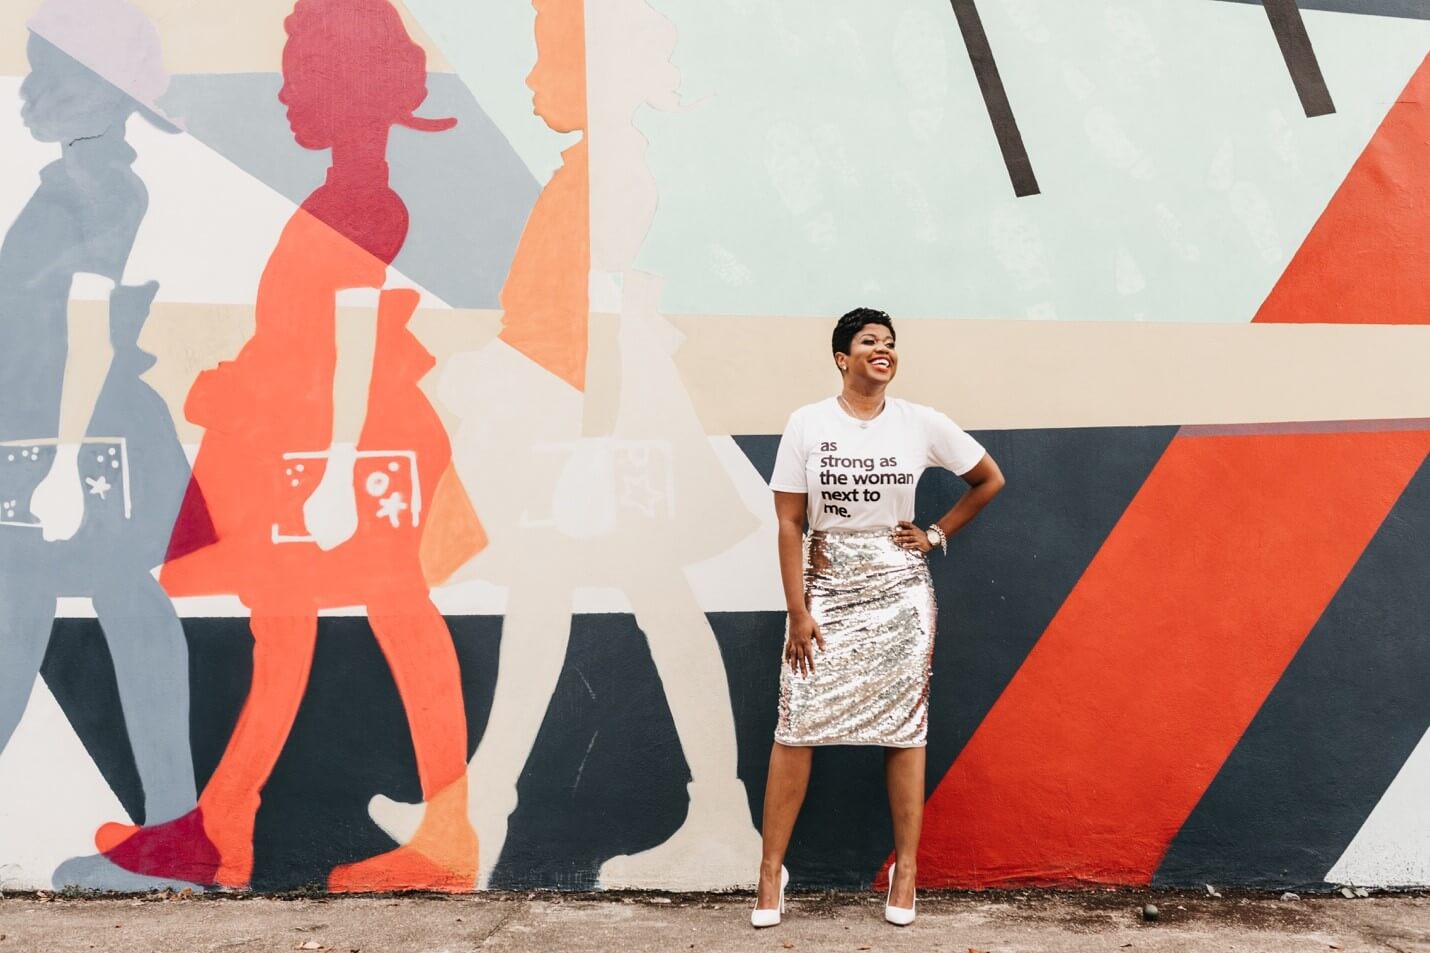 Powerful smiling Black woman stood in front of mural of Ruby Bridges.